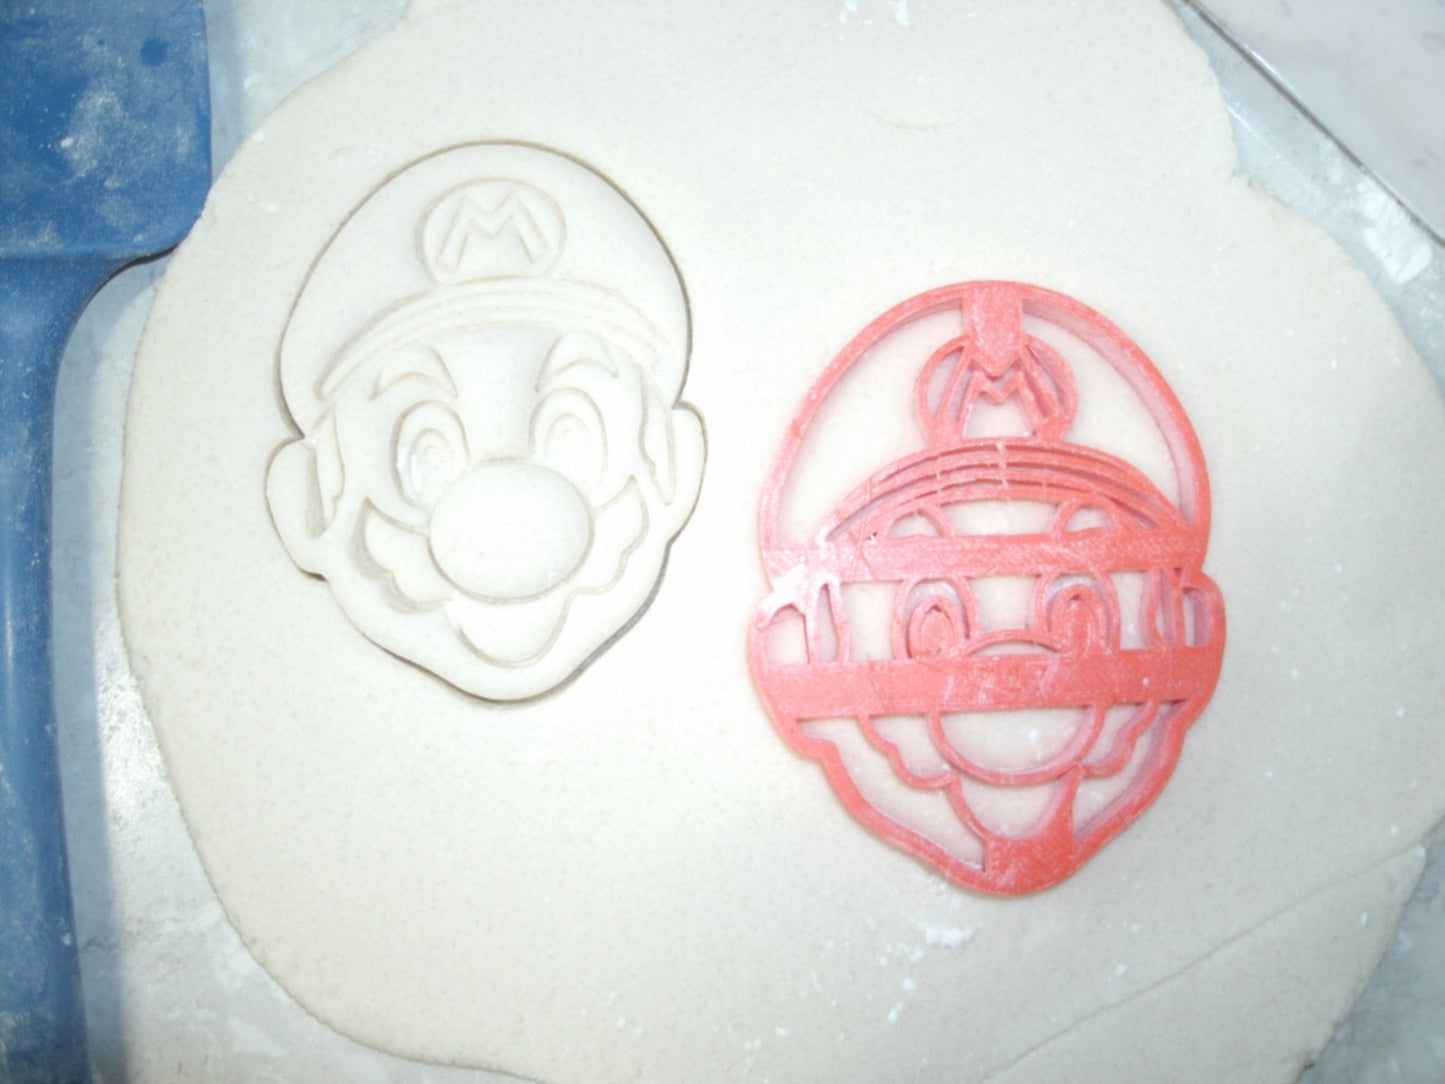 Mario Nintendo Video Game Character Cookie Cutter Made in USA PR747